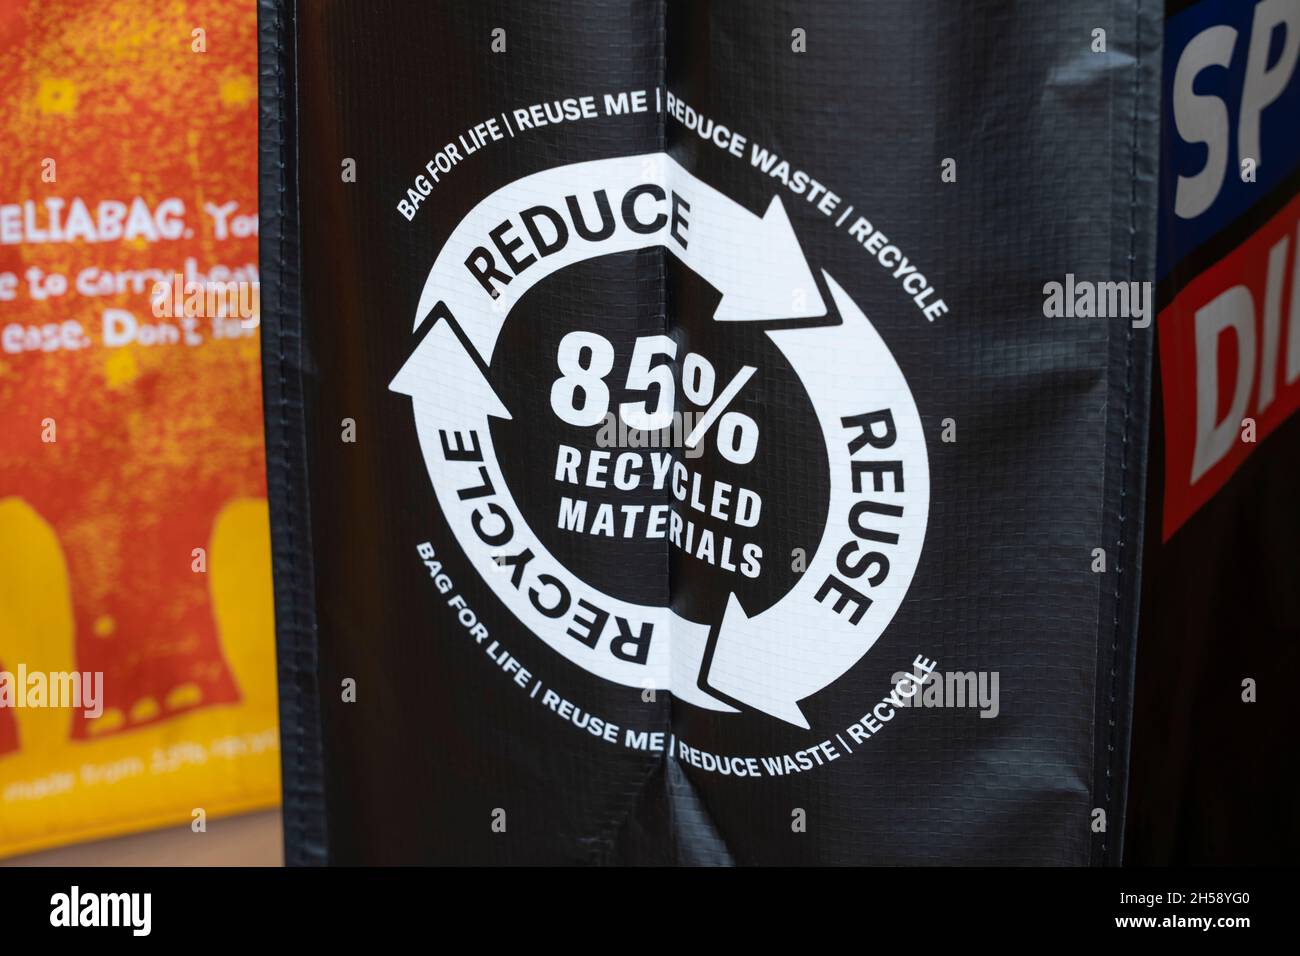 Bags for life from UK shops. Concept - reducing the use of single use plastic bags, reduce reuse recycle, recycled plastic Stock Photo